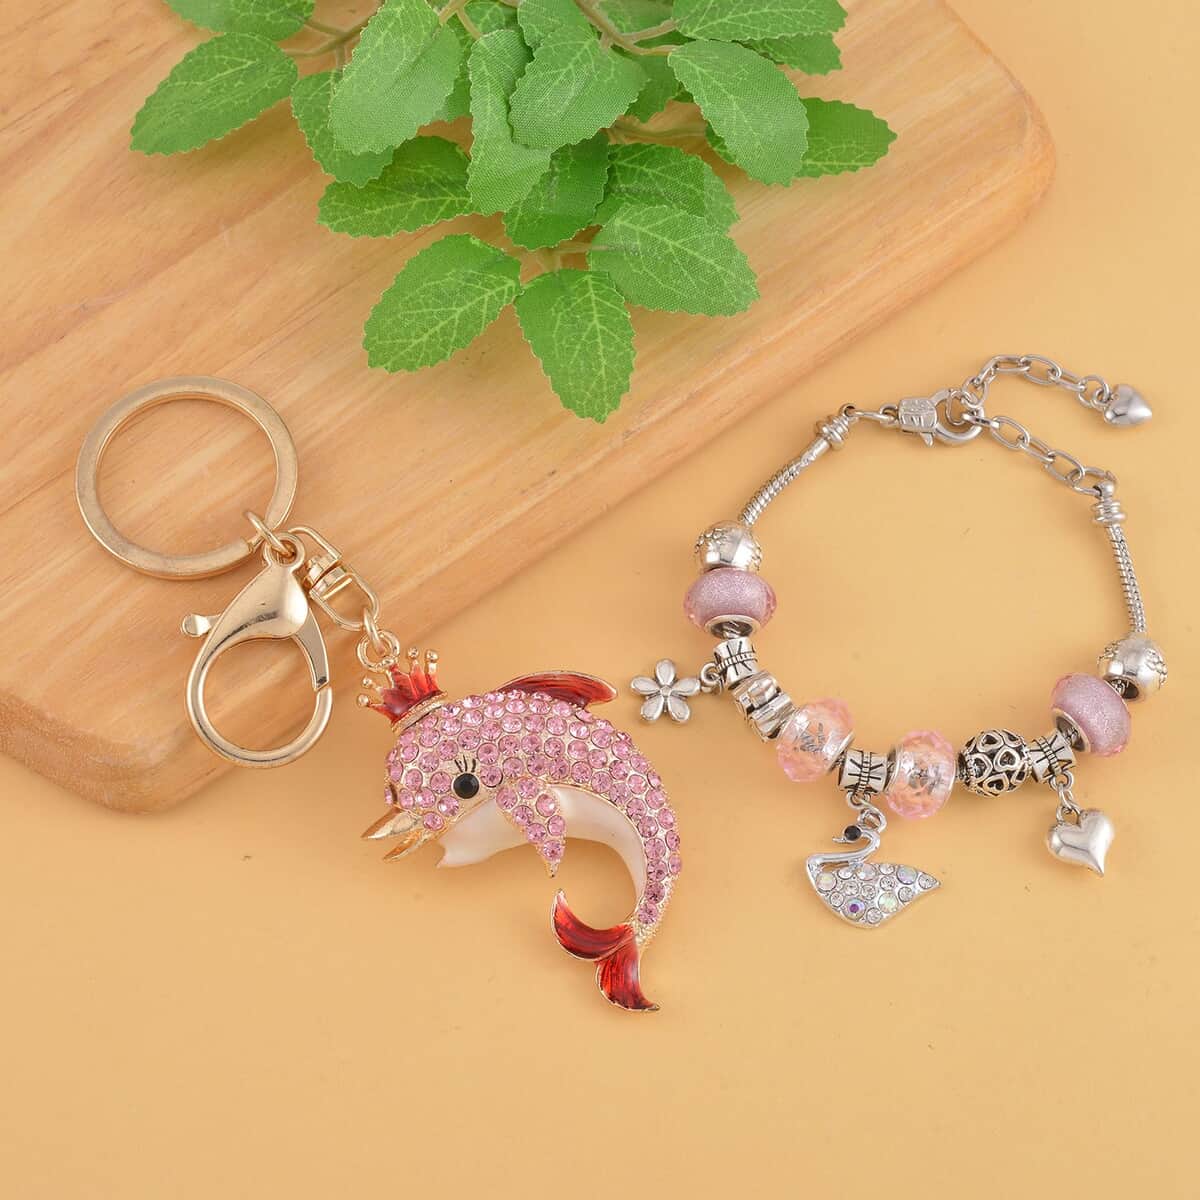 Pink Resin, Multi Austrian Crystal Bracelet (7-9In) in Silvertone with Enameled Dolphin Keychain in Goldtone image number 1